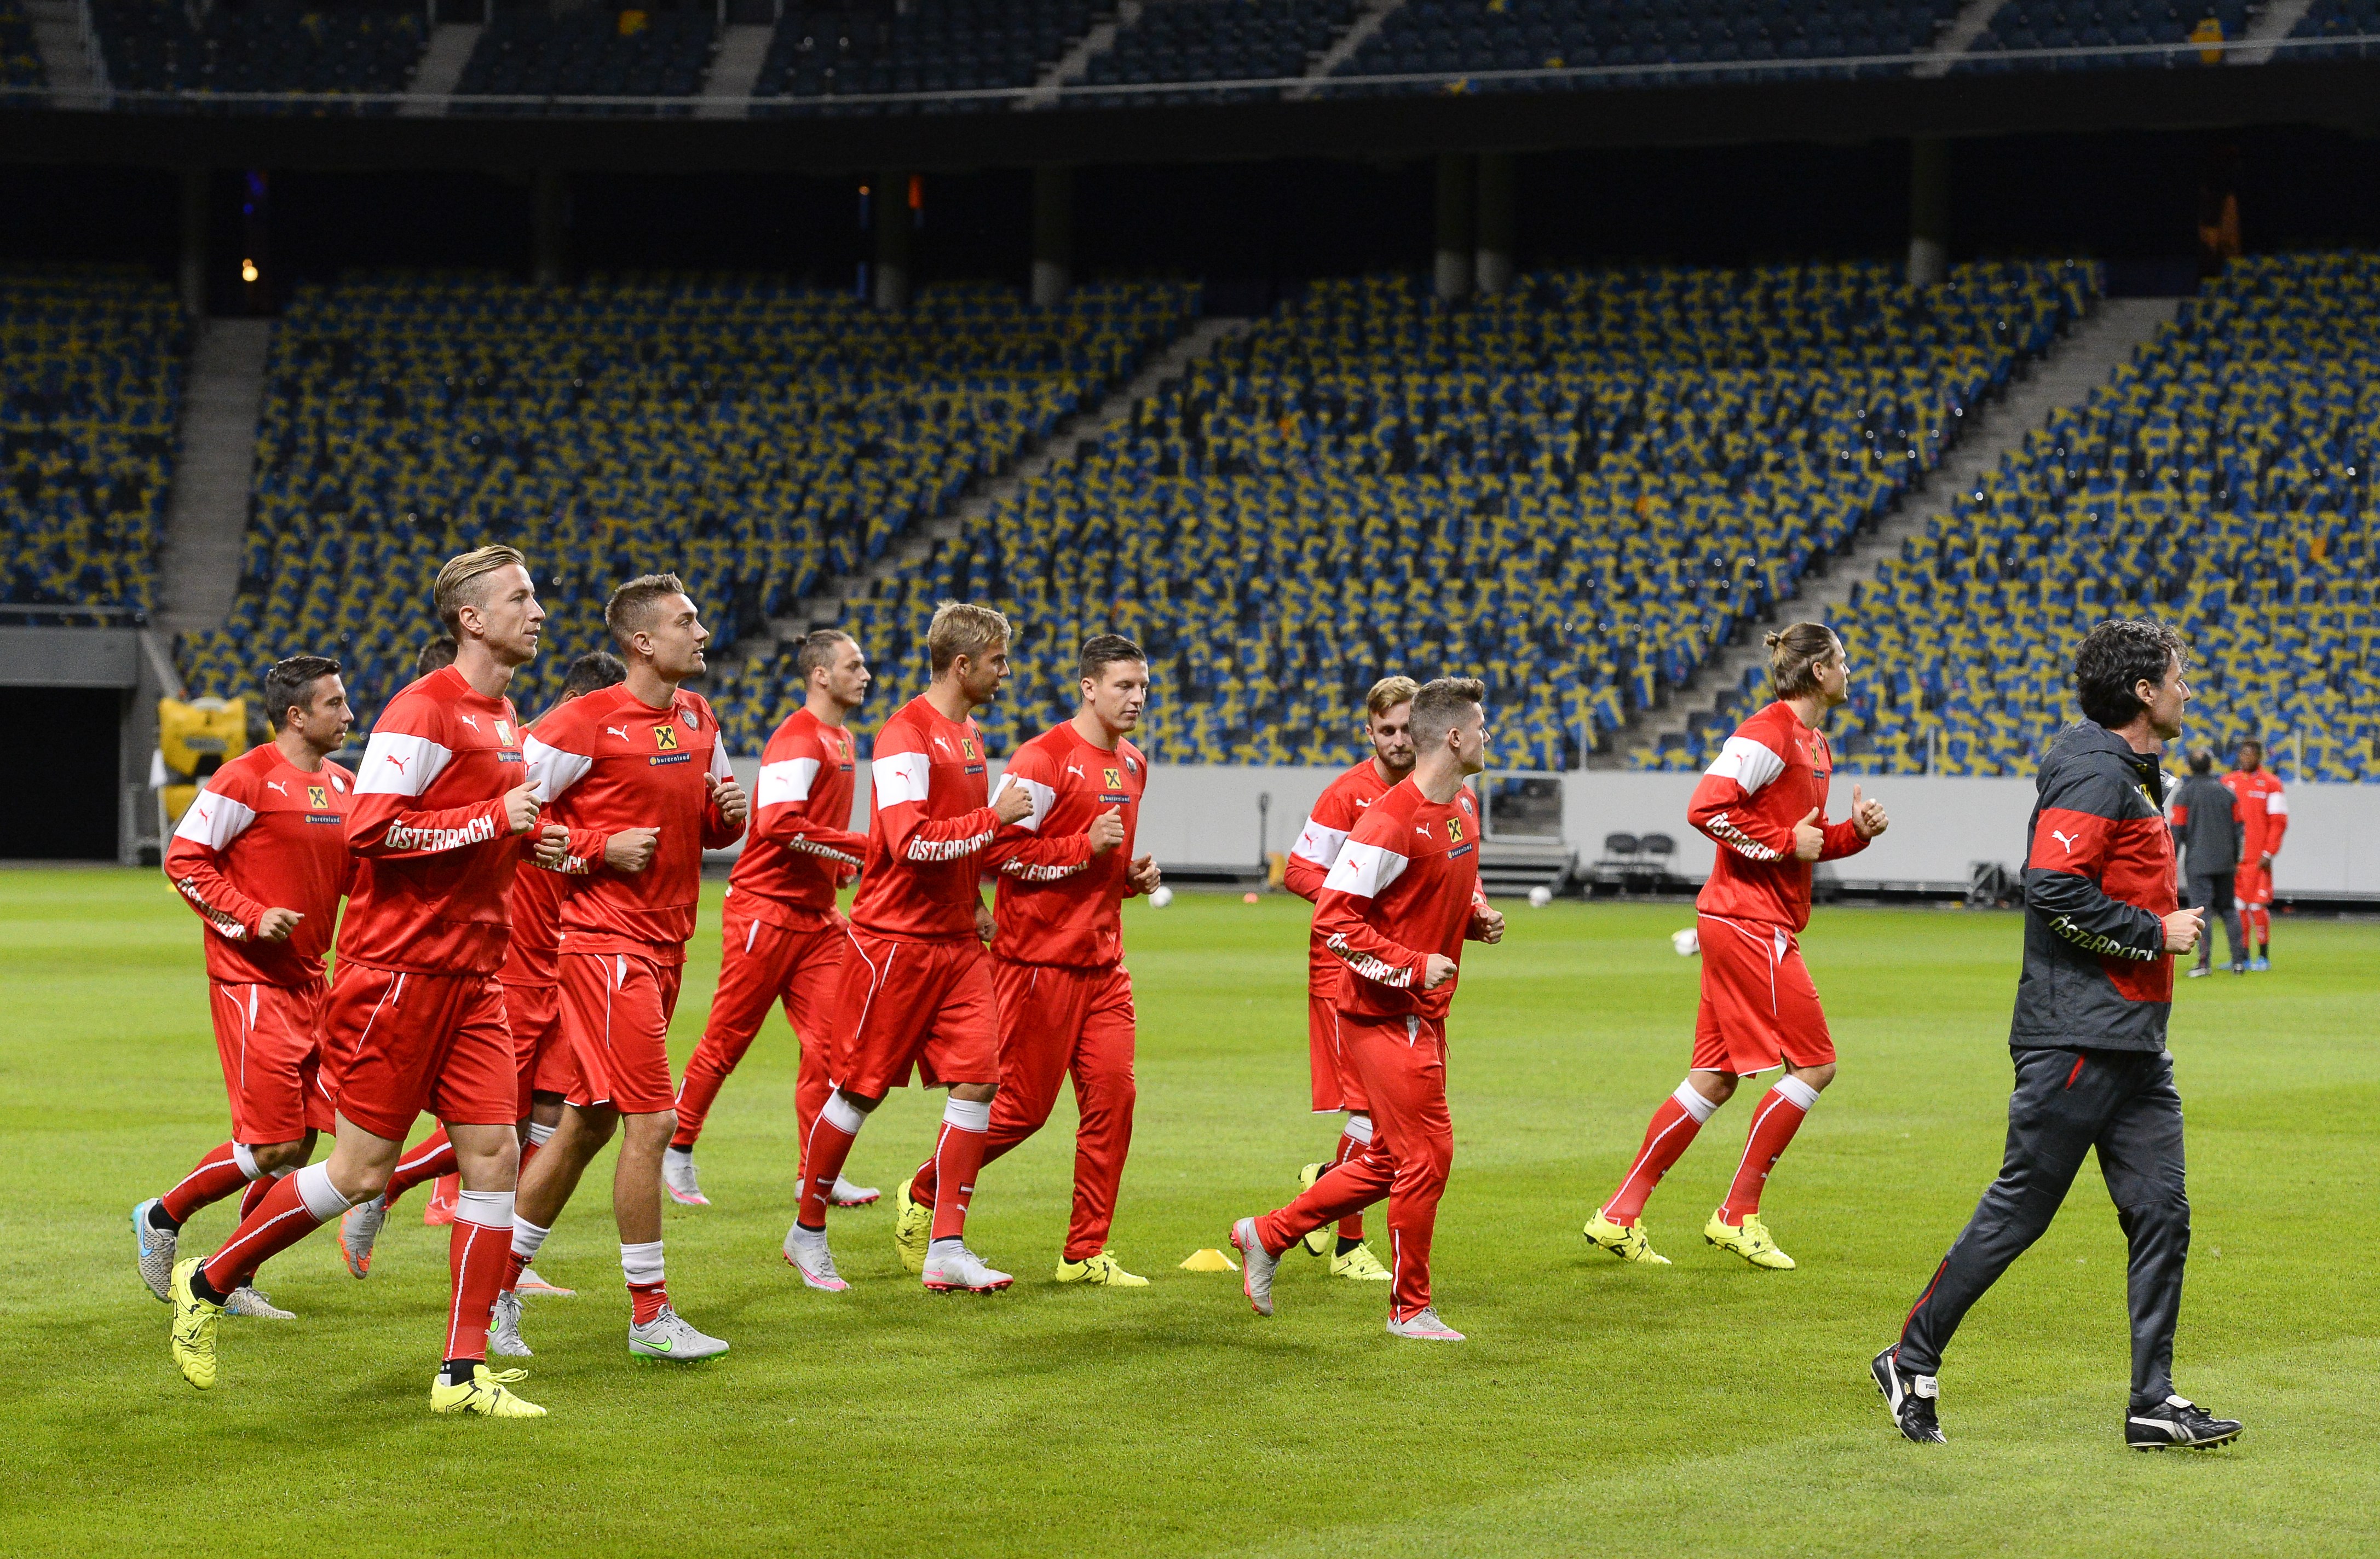 Players of the Austrian national football team take part in a training session at Friends Arena in Solna, near Stockholm on September 7, 2015 on the eve of the Euro 2016 qualifying football match between Sweden and Austria. AFP PHOTO/JONATHAN NACKSTRAND        (Photo credit should read JONATHAN NACKSTRAND/AFP/Getty Images)